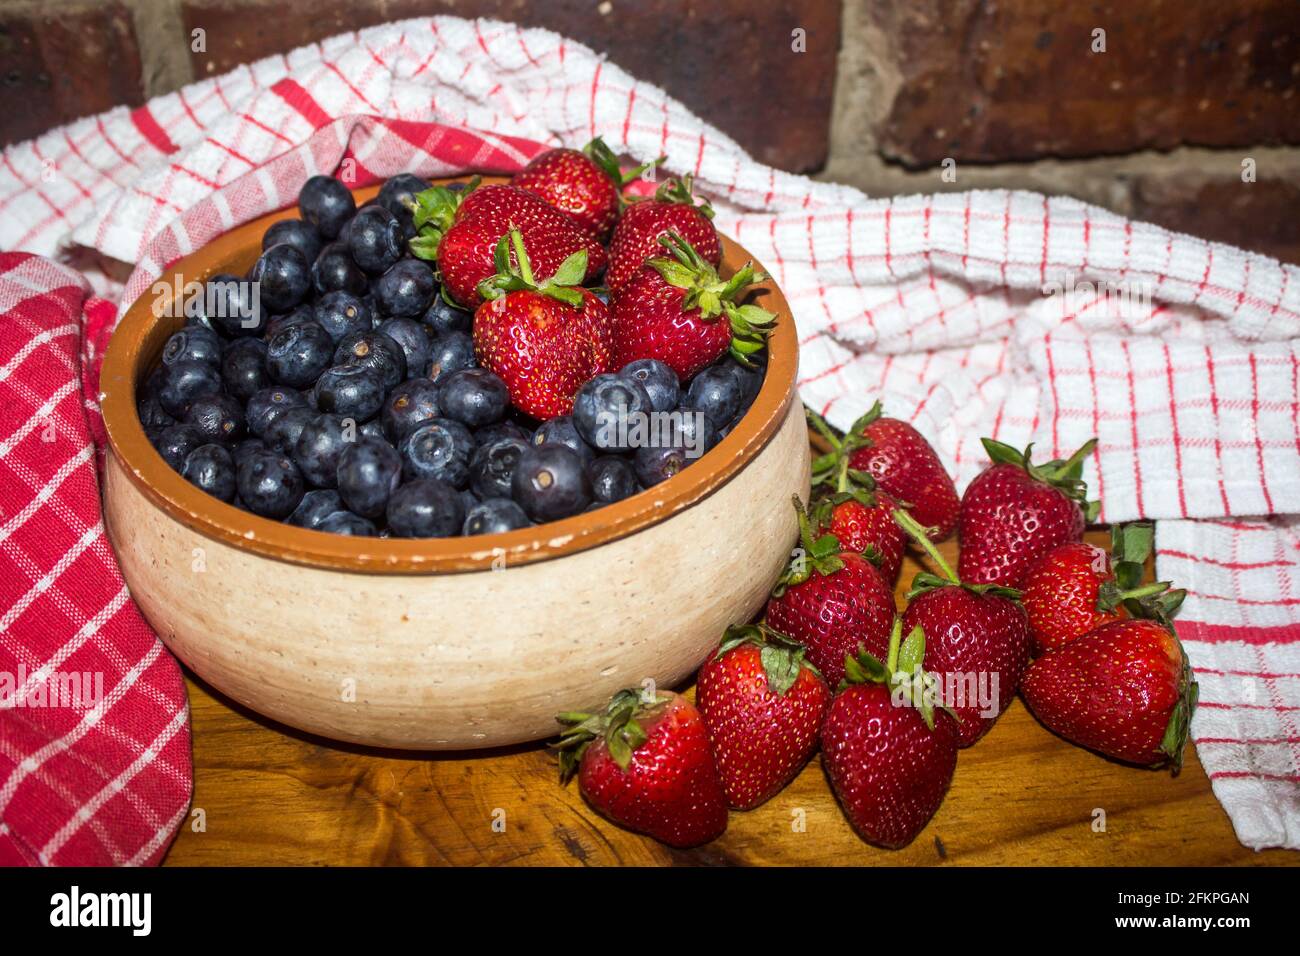 A rustic pottery bowl, filled with Blueberries, surrounded by strawberries and red kitchen Towels Stock Photo